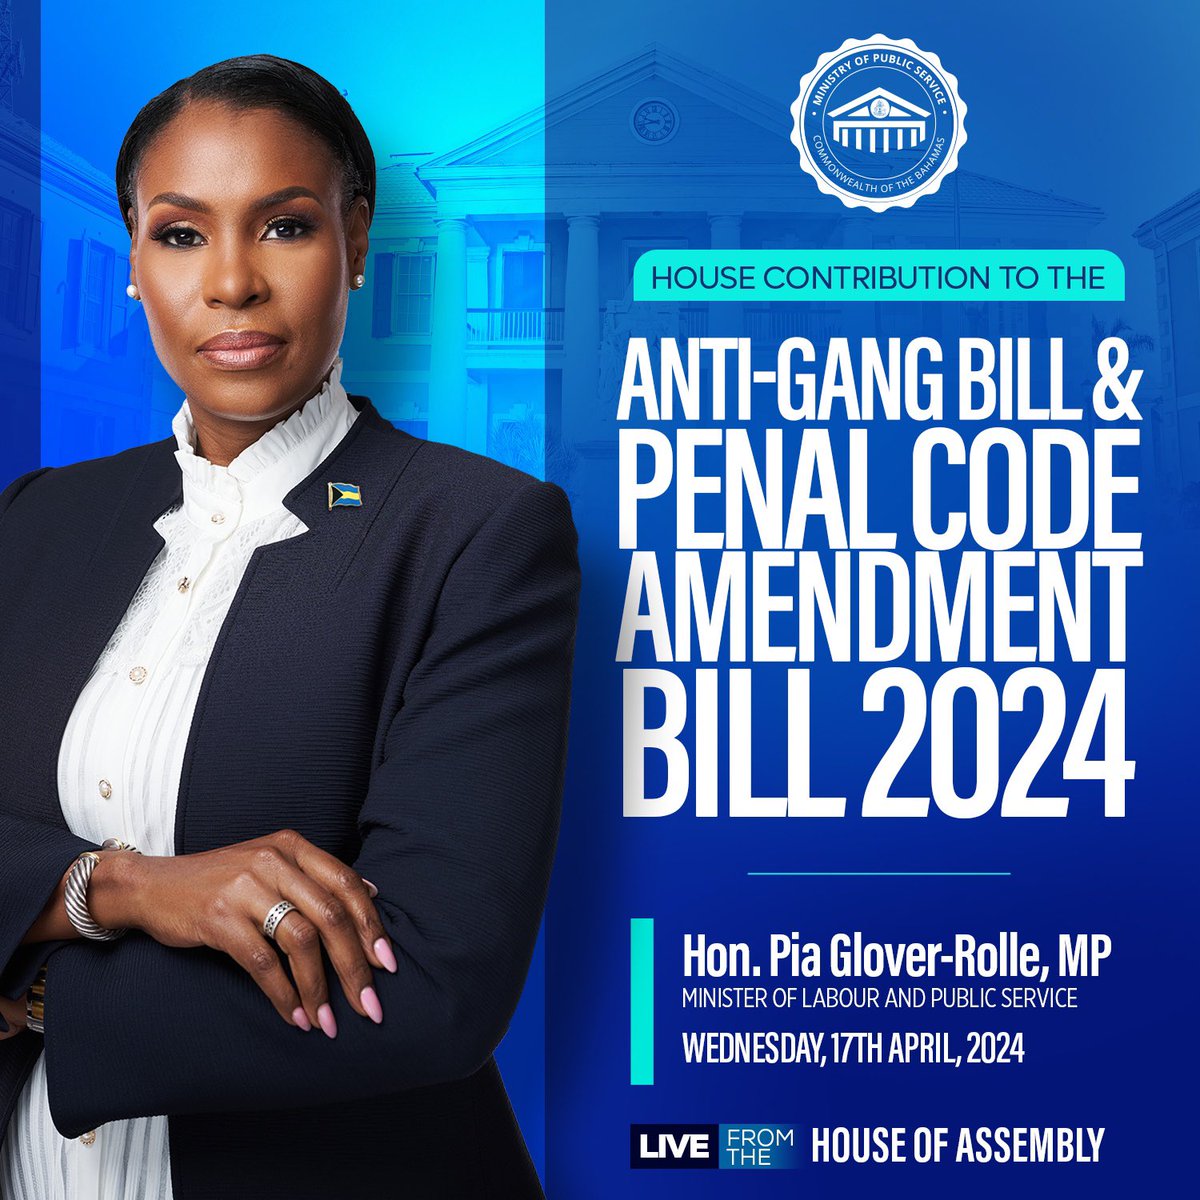 Tune in as I debate the Anti-Gang Bill & Penal Code Amendment and give details on how Golden Gates is doing our part as a community to help in the fight against gang activity, crime prevention and positive initiatives to engage our youth.